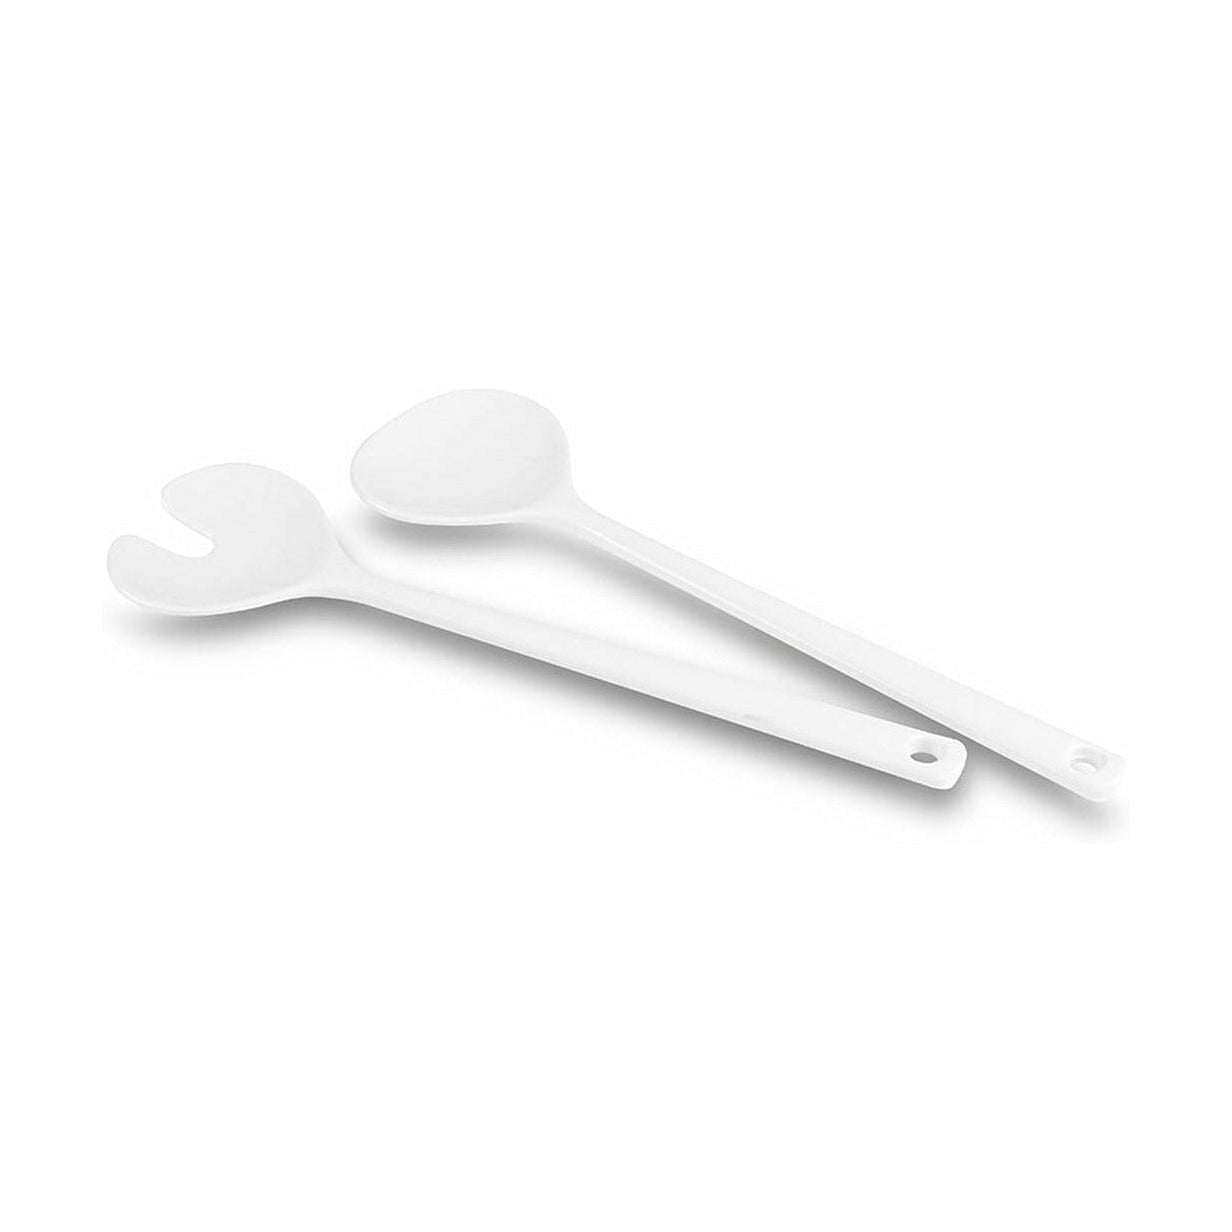 Mepal Bloom Salad Cutery 2 Parts, White